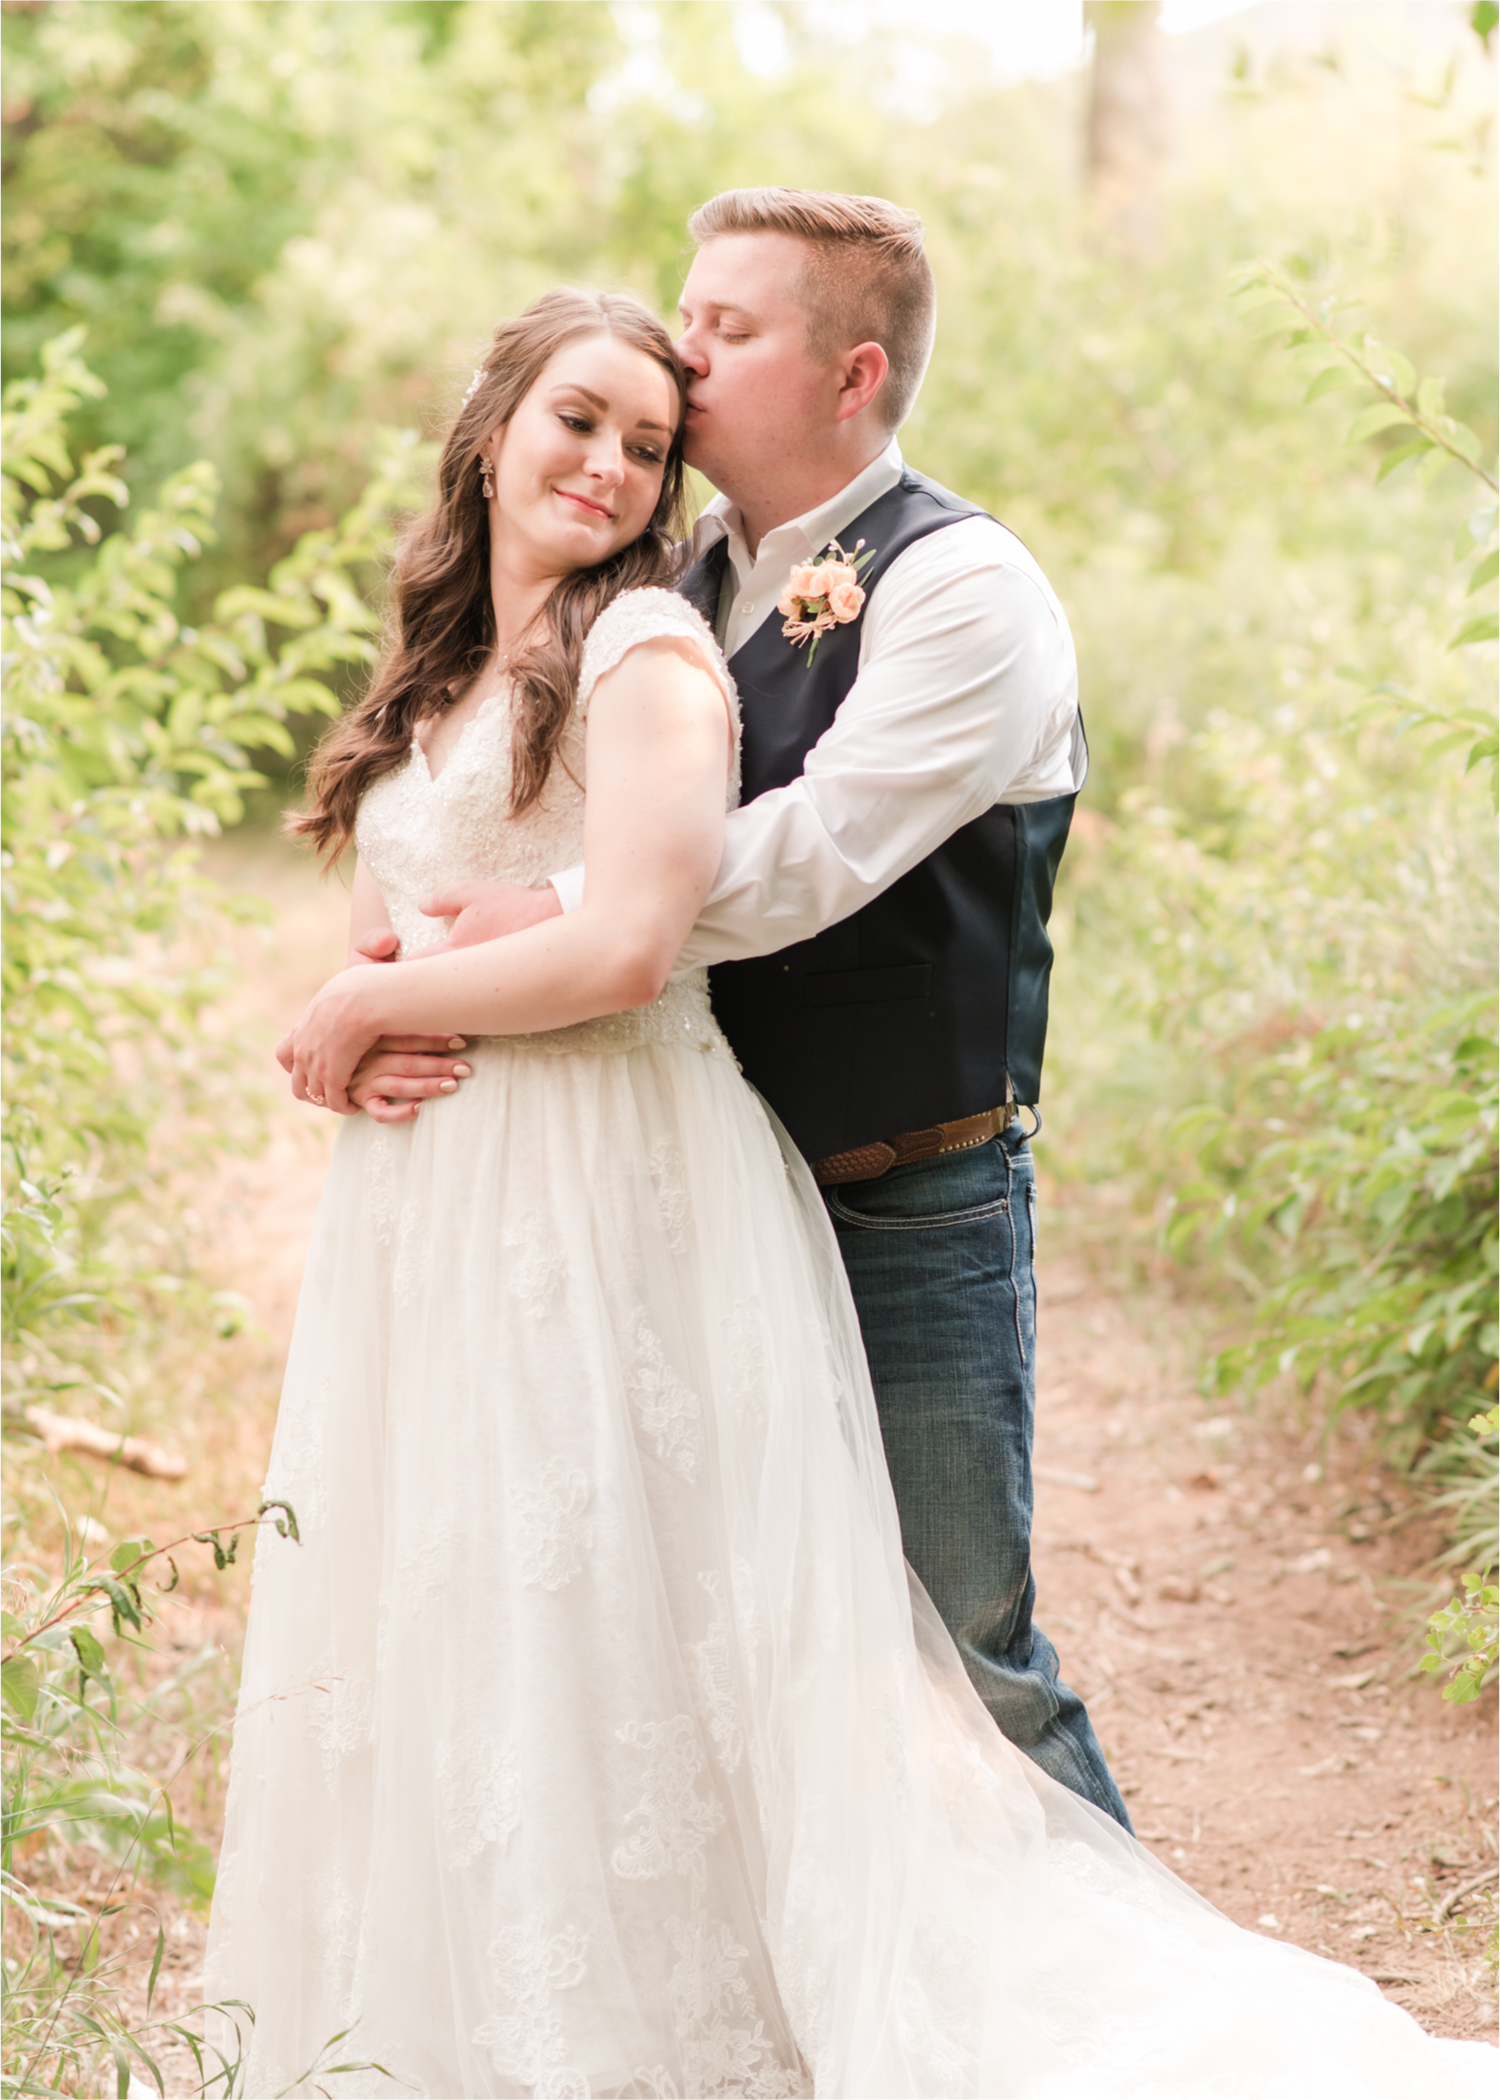 Summer Ellis Ranch Wedding in Loveland Colorado | Britni Girard Photography | Wedding Photo and Video Team | Bride and Groom Just Married Walk in Forrest